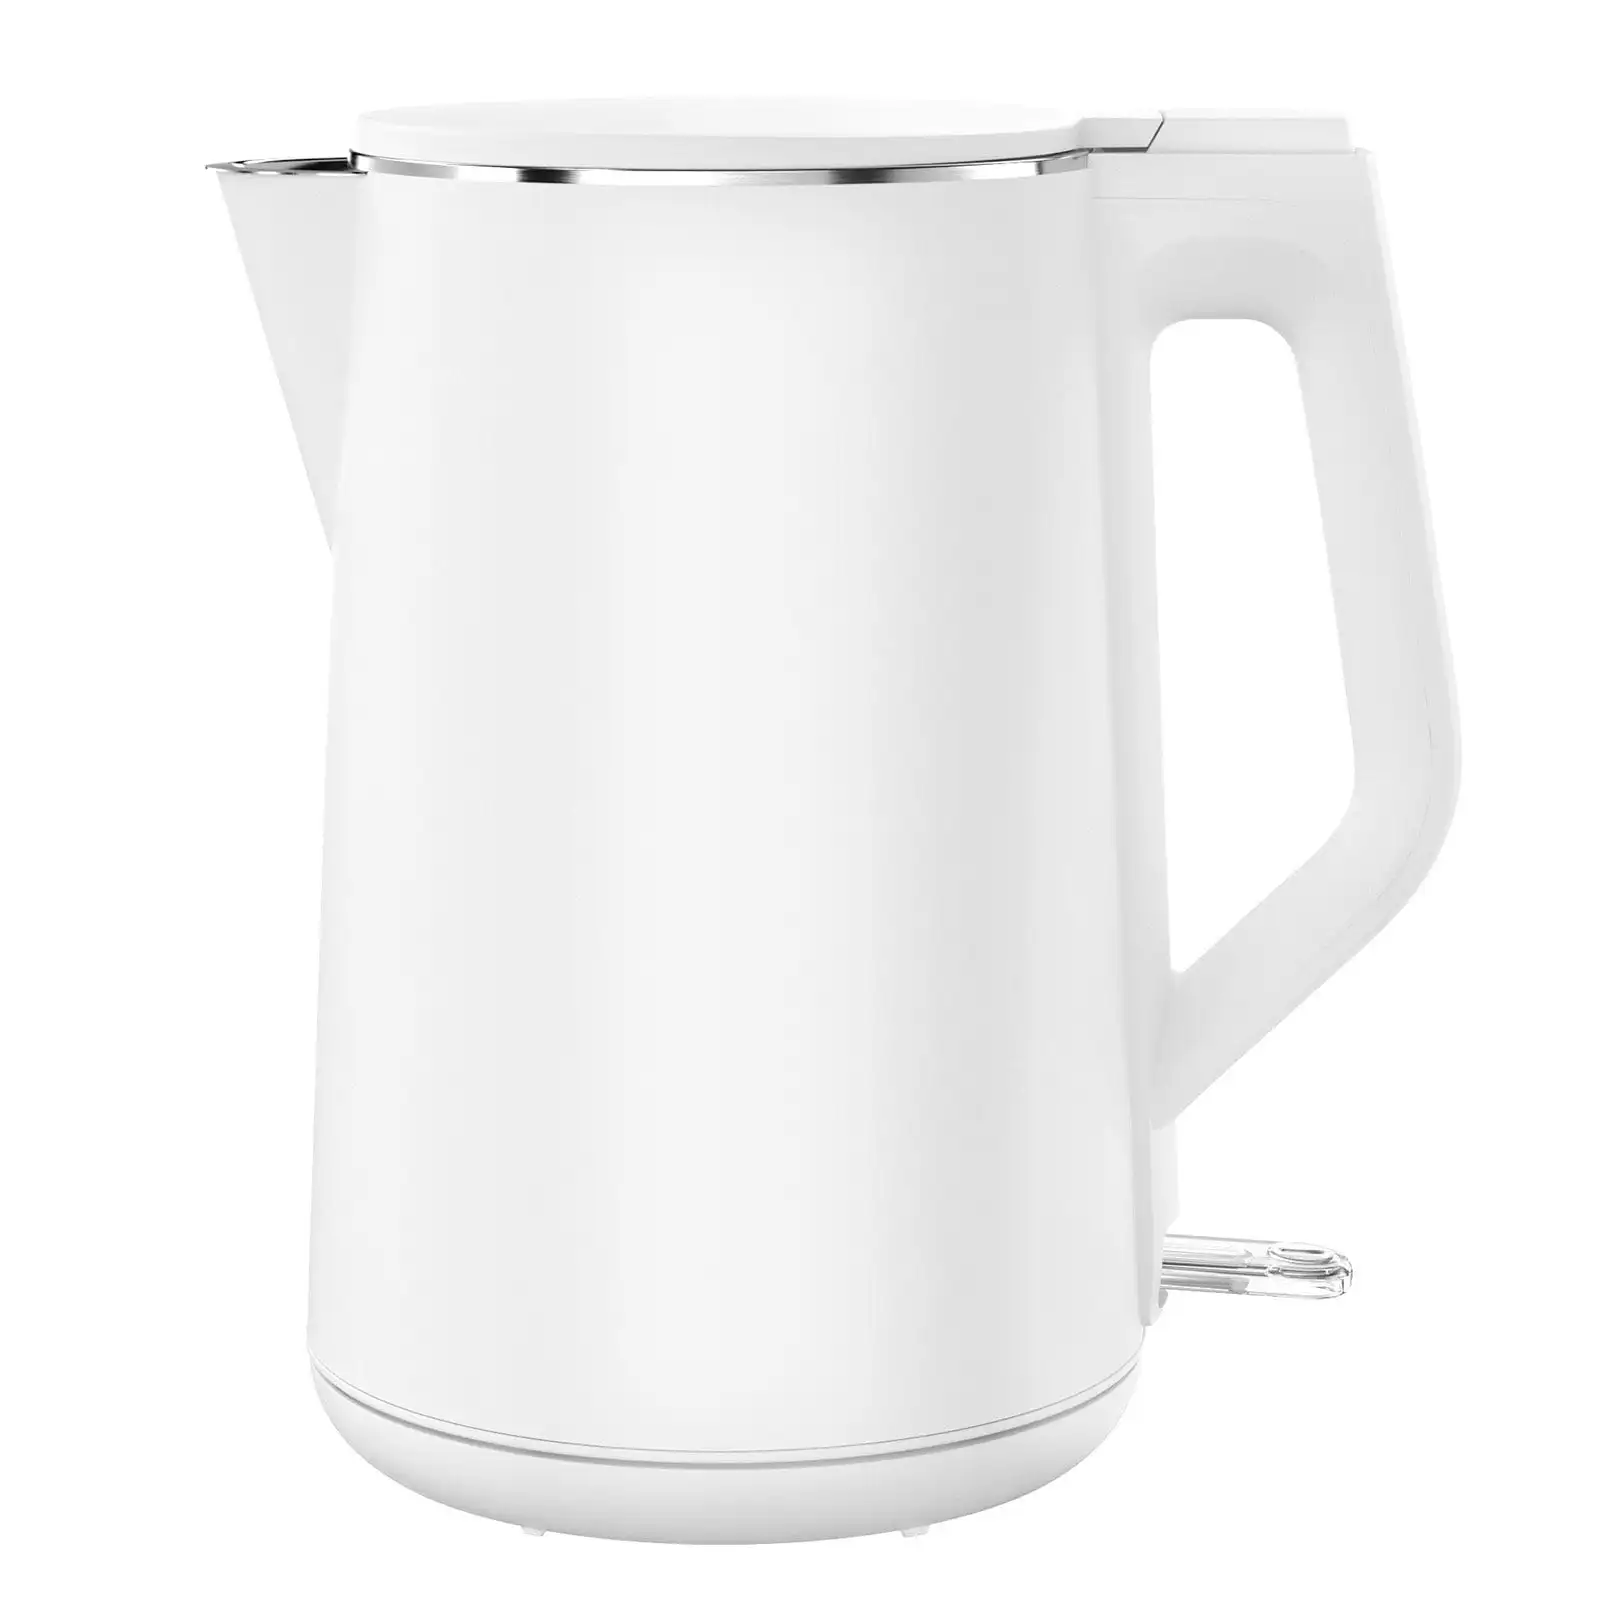 

Kettle 1.5L, 100% Stainless Steel Interior Double Wall Tea Kettle, 1500W Cool Touch Water Boiler, BPA-Free with Auto Shut-Off &